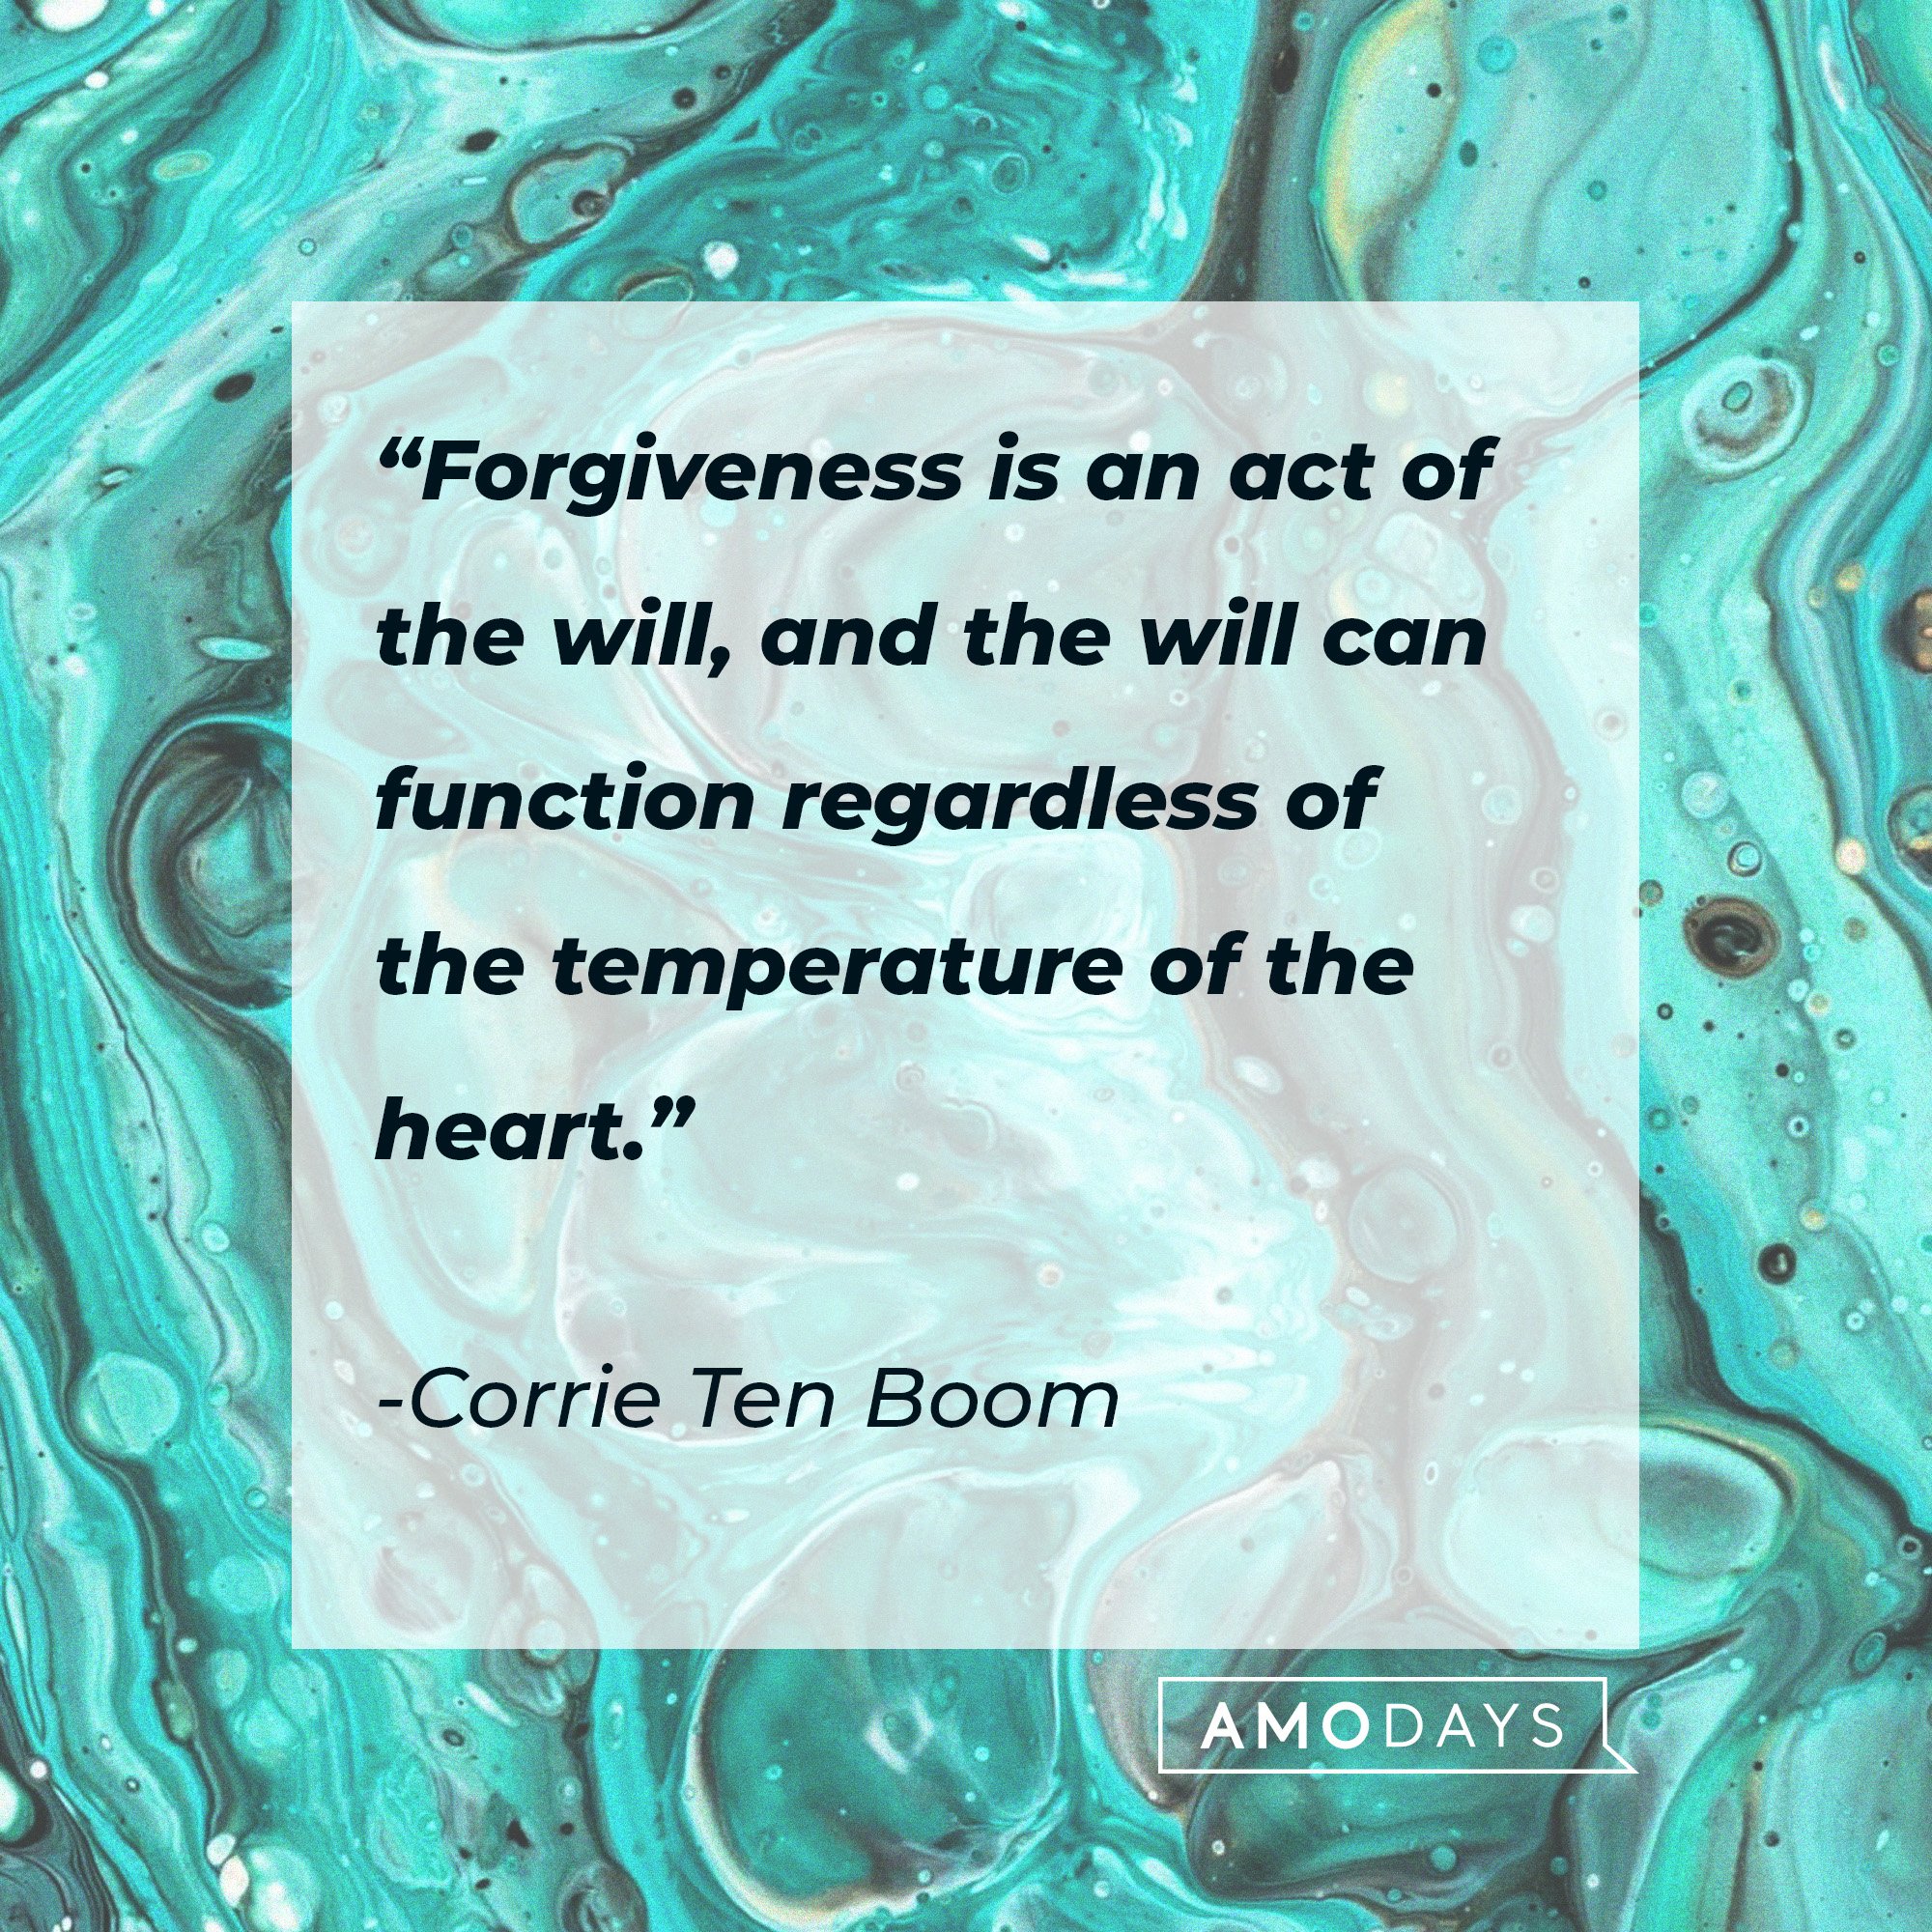 Corrie Ten Boom's quote: “Forgiveness is an act of the will, and the will can function regardless of the temperature of the heart.” | Image: Corrie Ten Boom